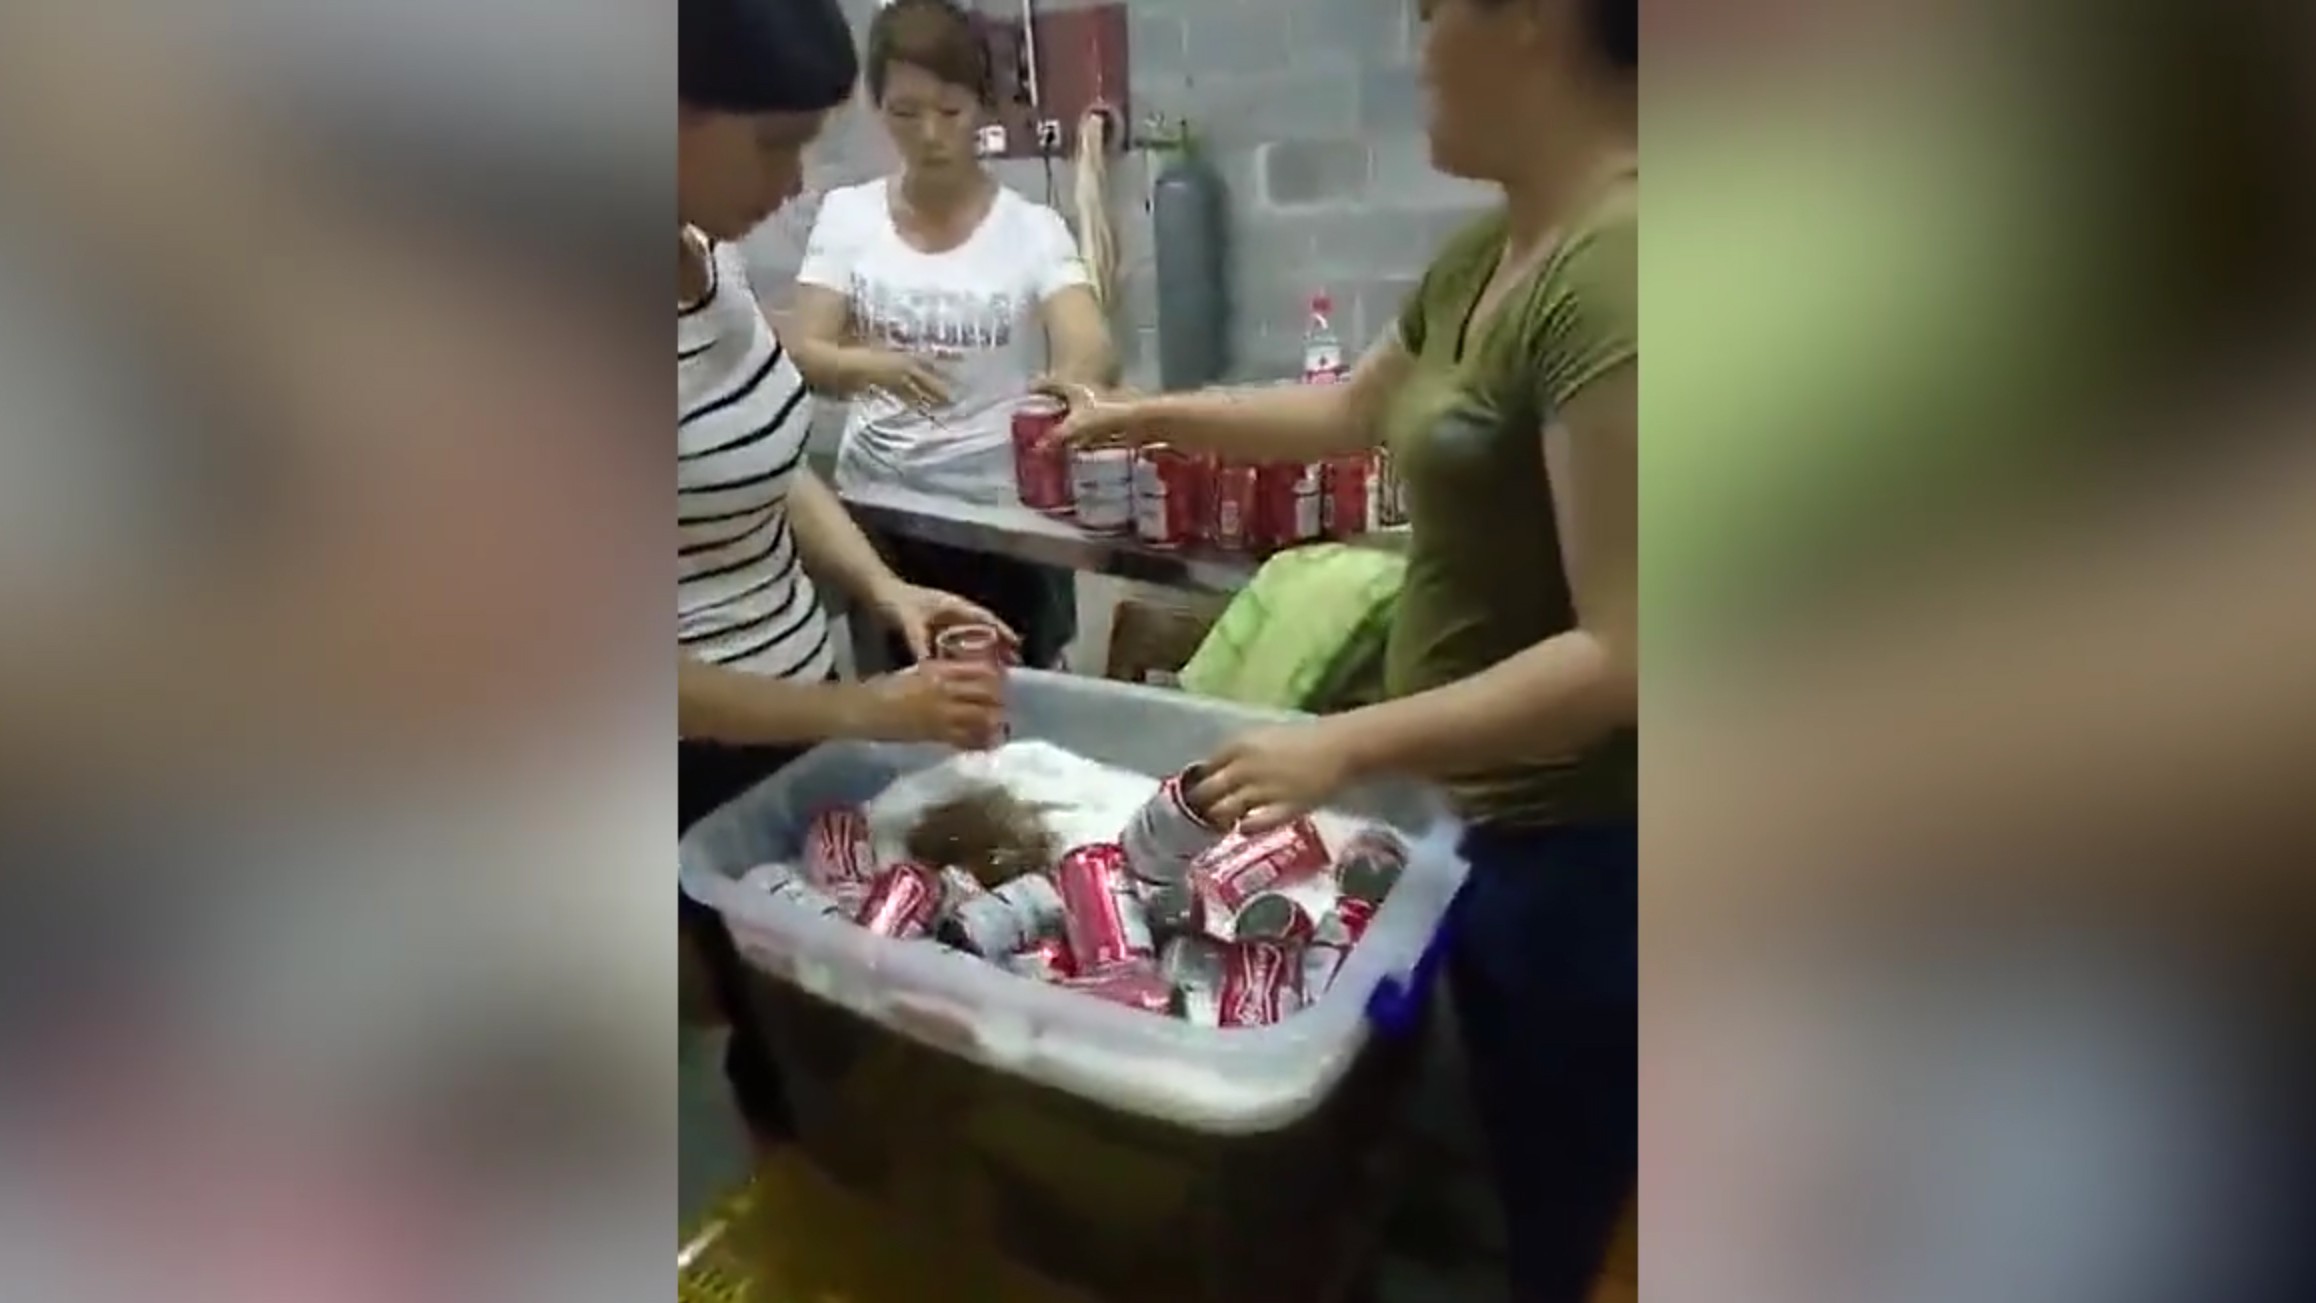 Workers shown in the video putting beer into used cans. Photo: Handout